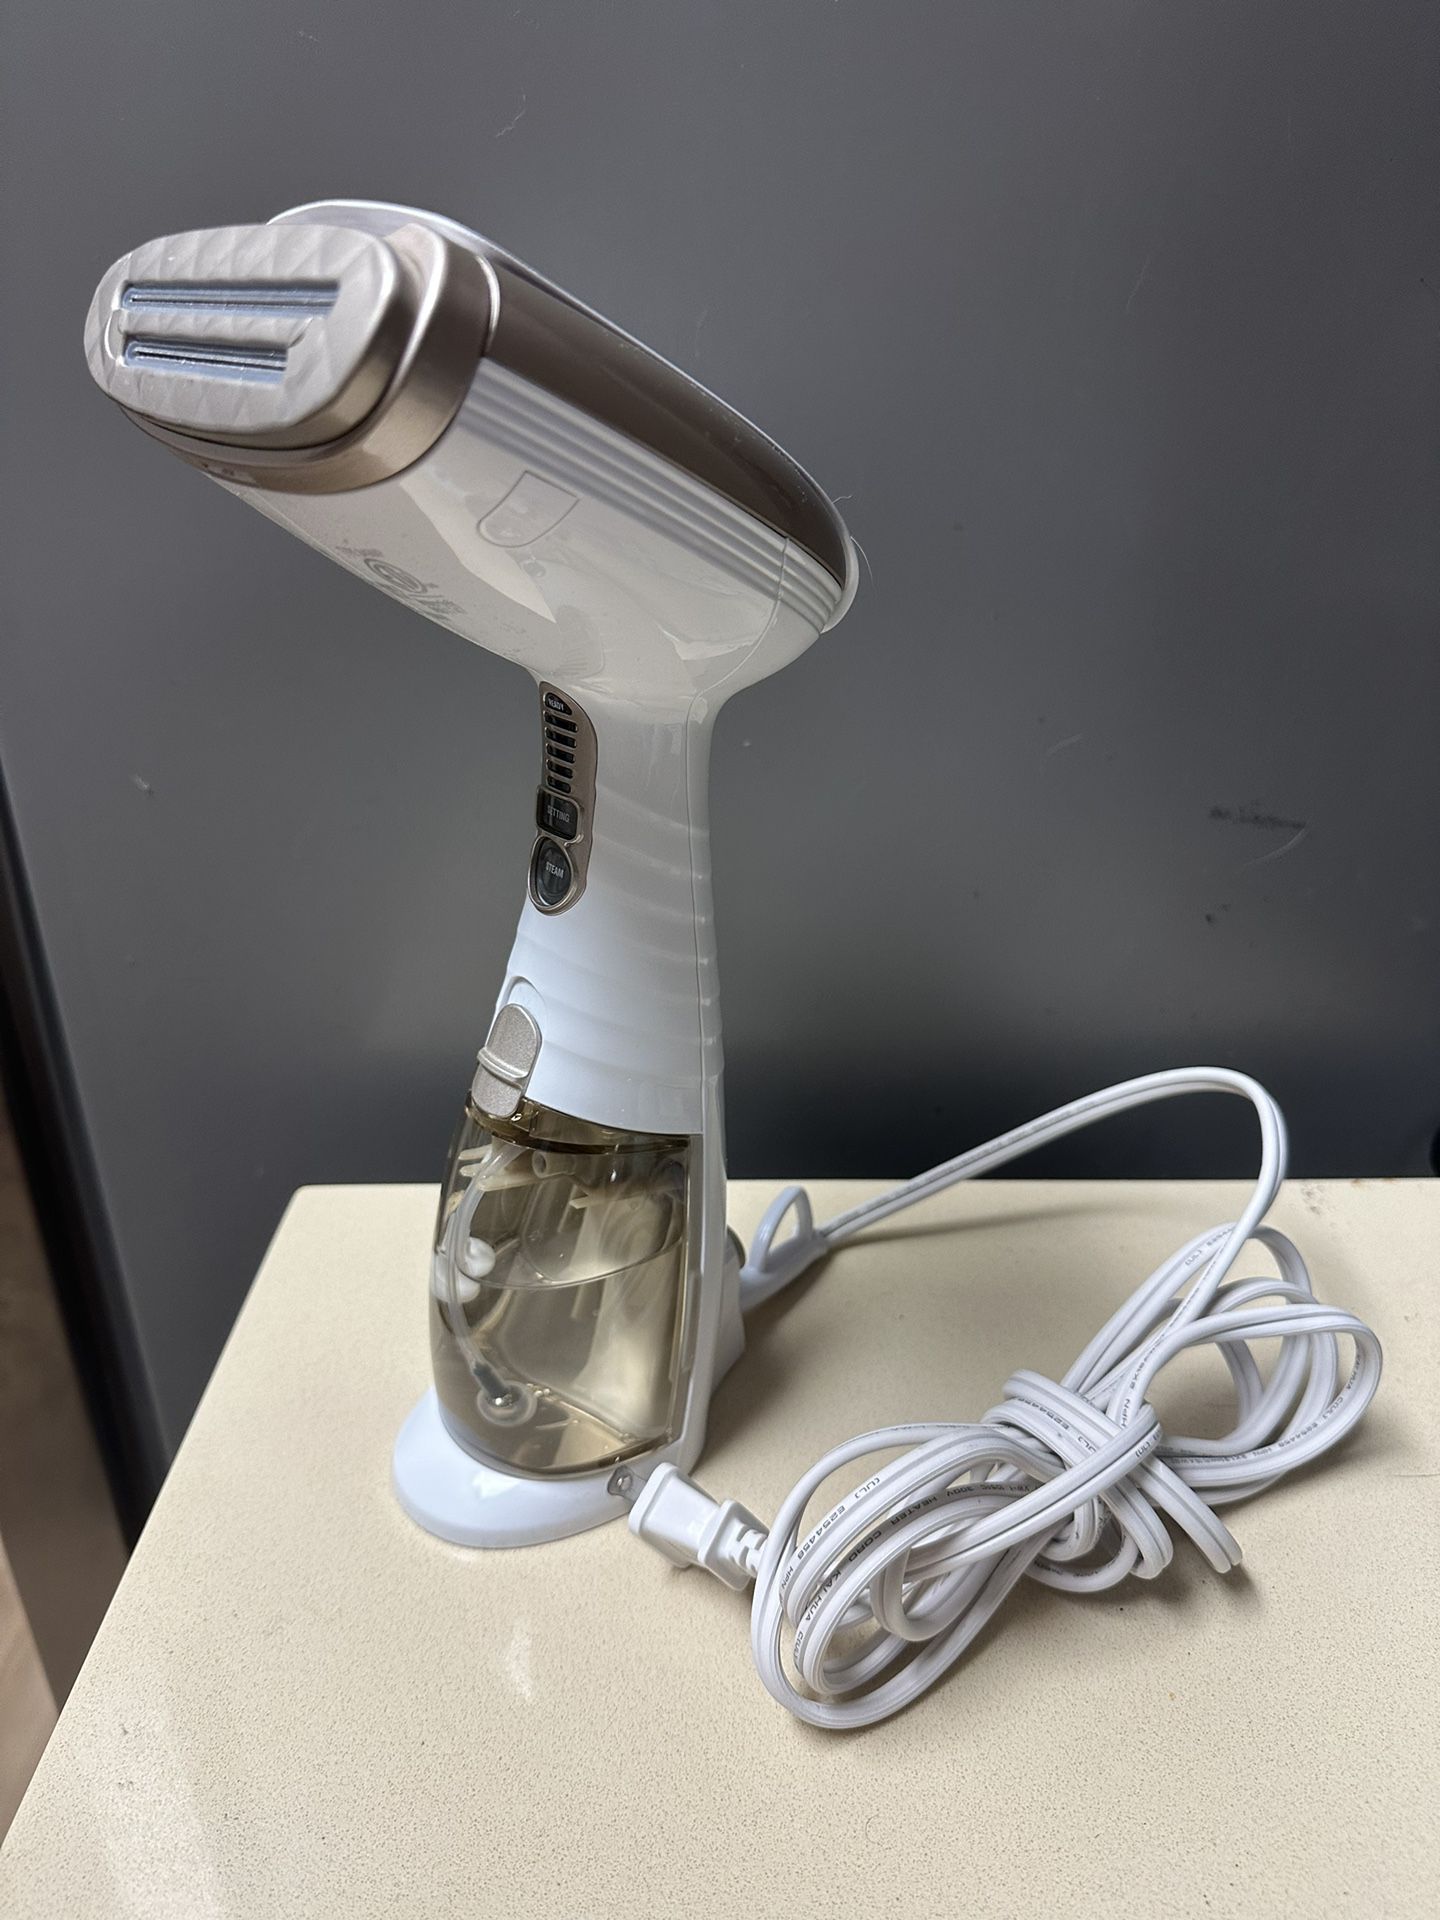 Conair Handheld Garment Steamer for Clothes, Turbo ExtremeSteam 1875W, Portable Handheld Design, Strong Penetrating Steam, White